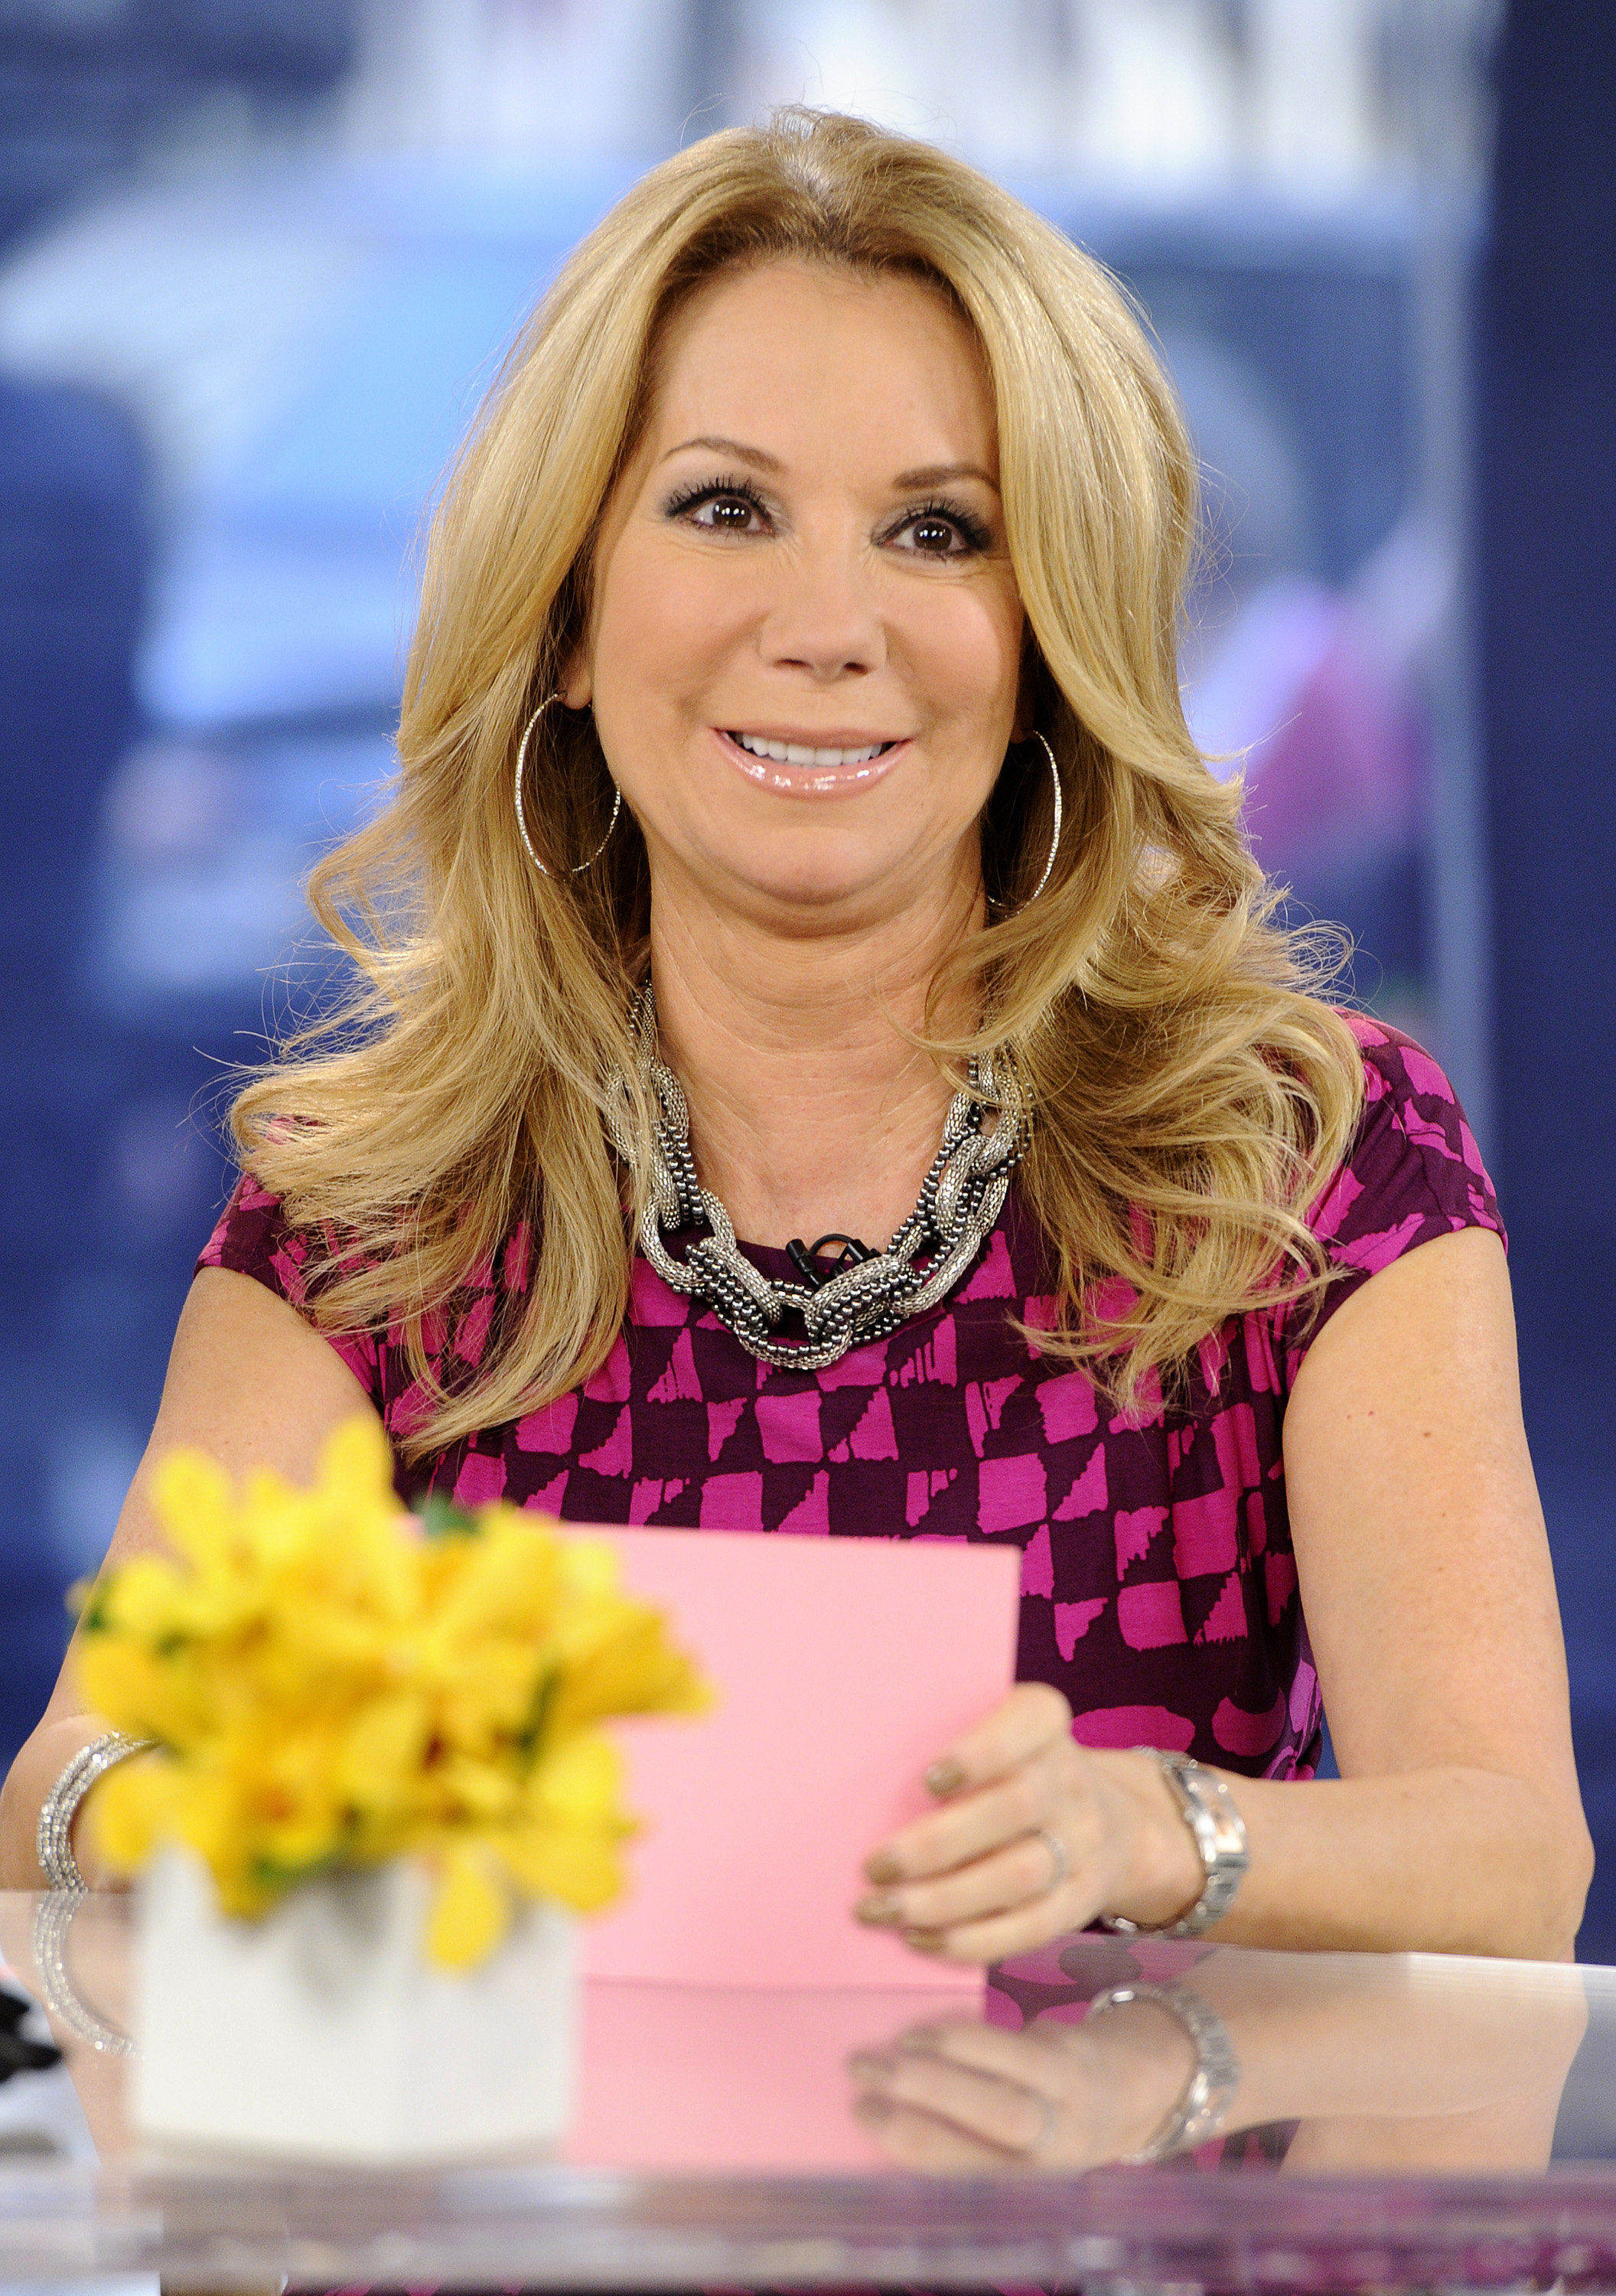 Kathie Lee Gifford appears on NBC News' "Today" show on October 10, 2011 | Source: Getty Images